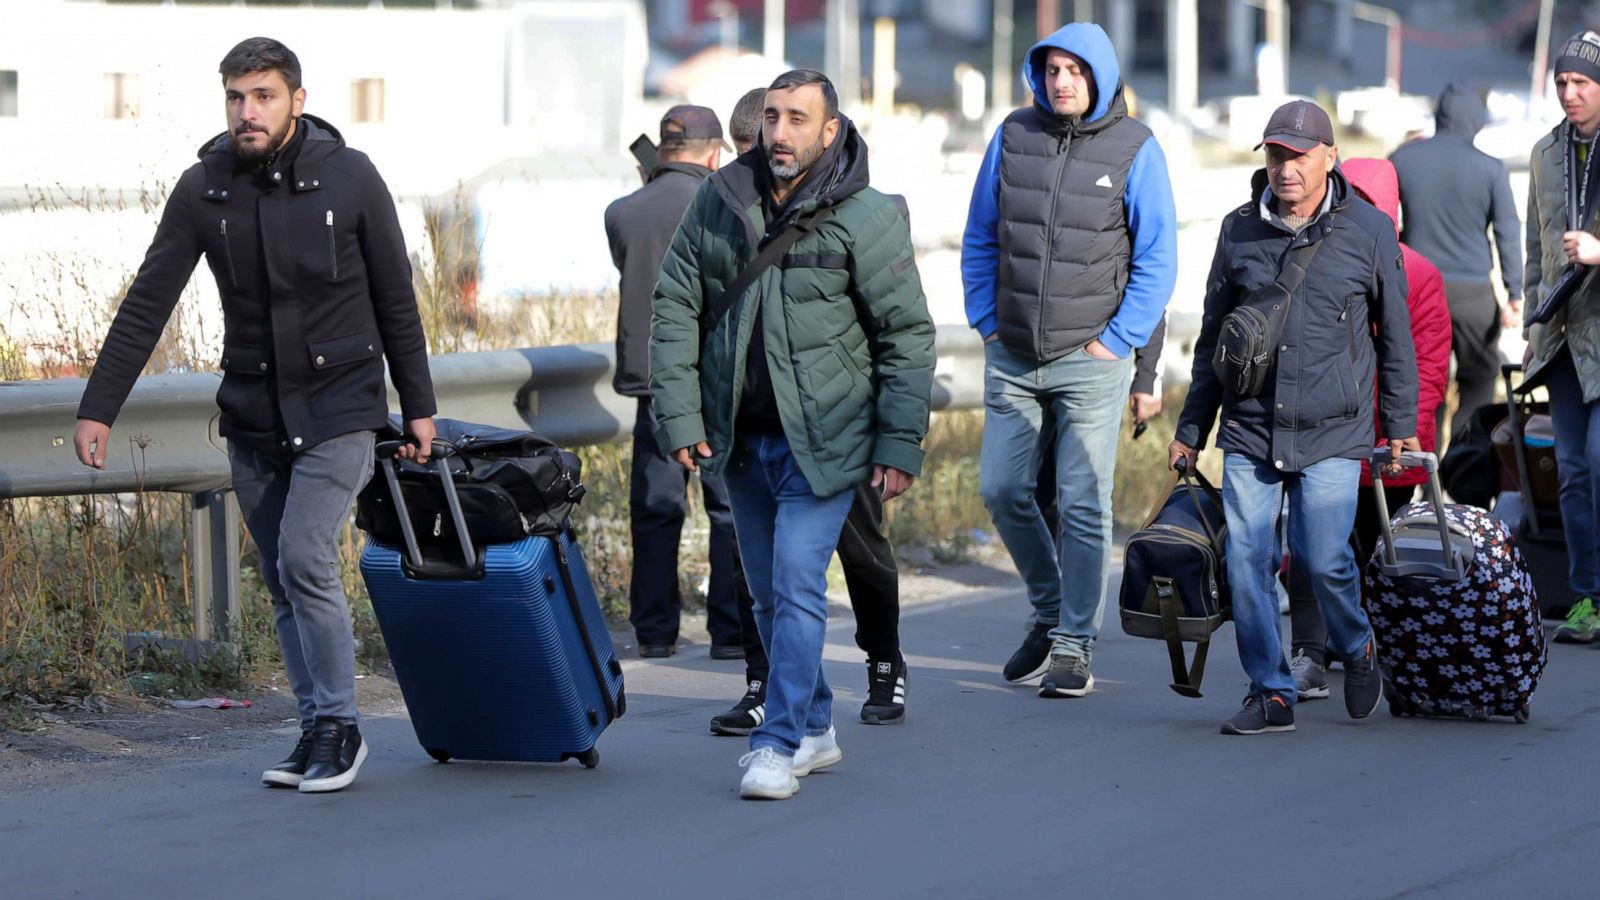 Russian men flee the country. Many are showing up in Istanbul